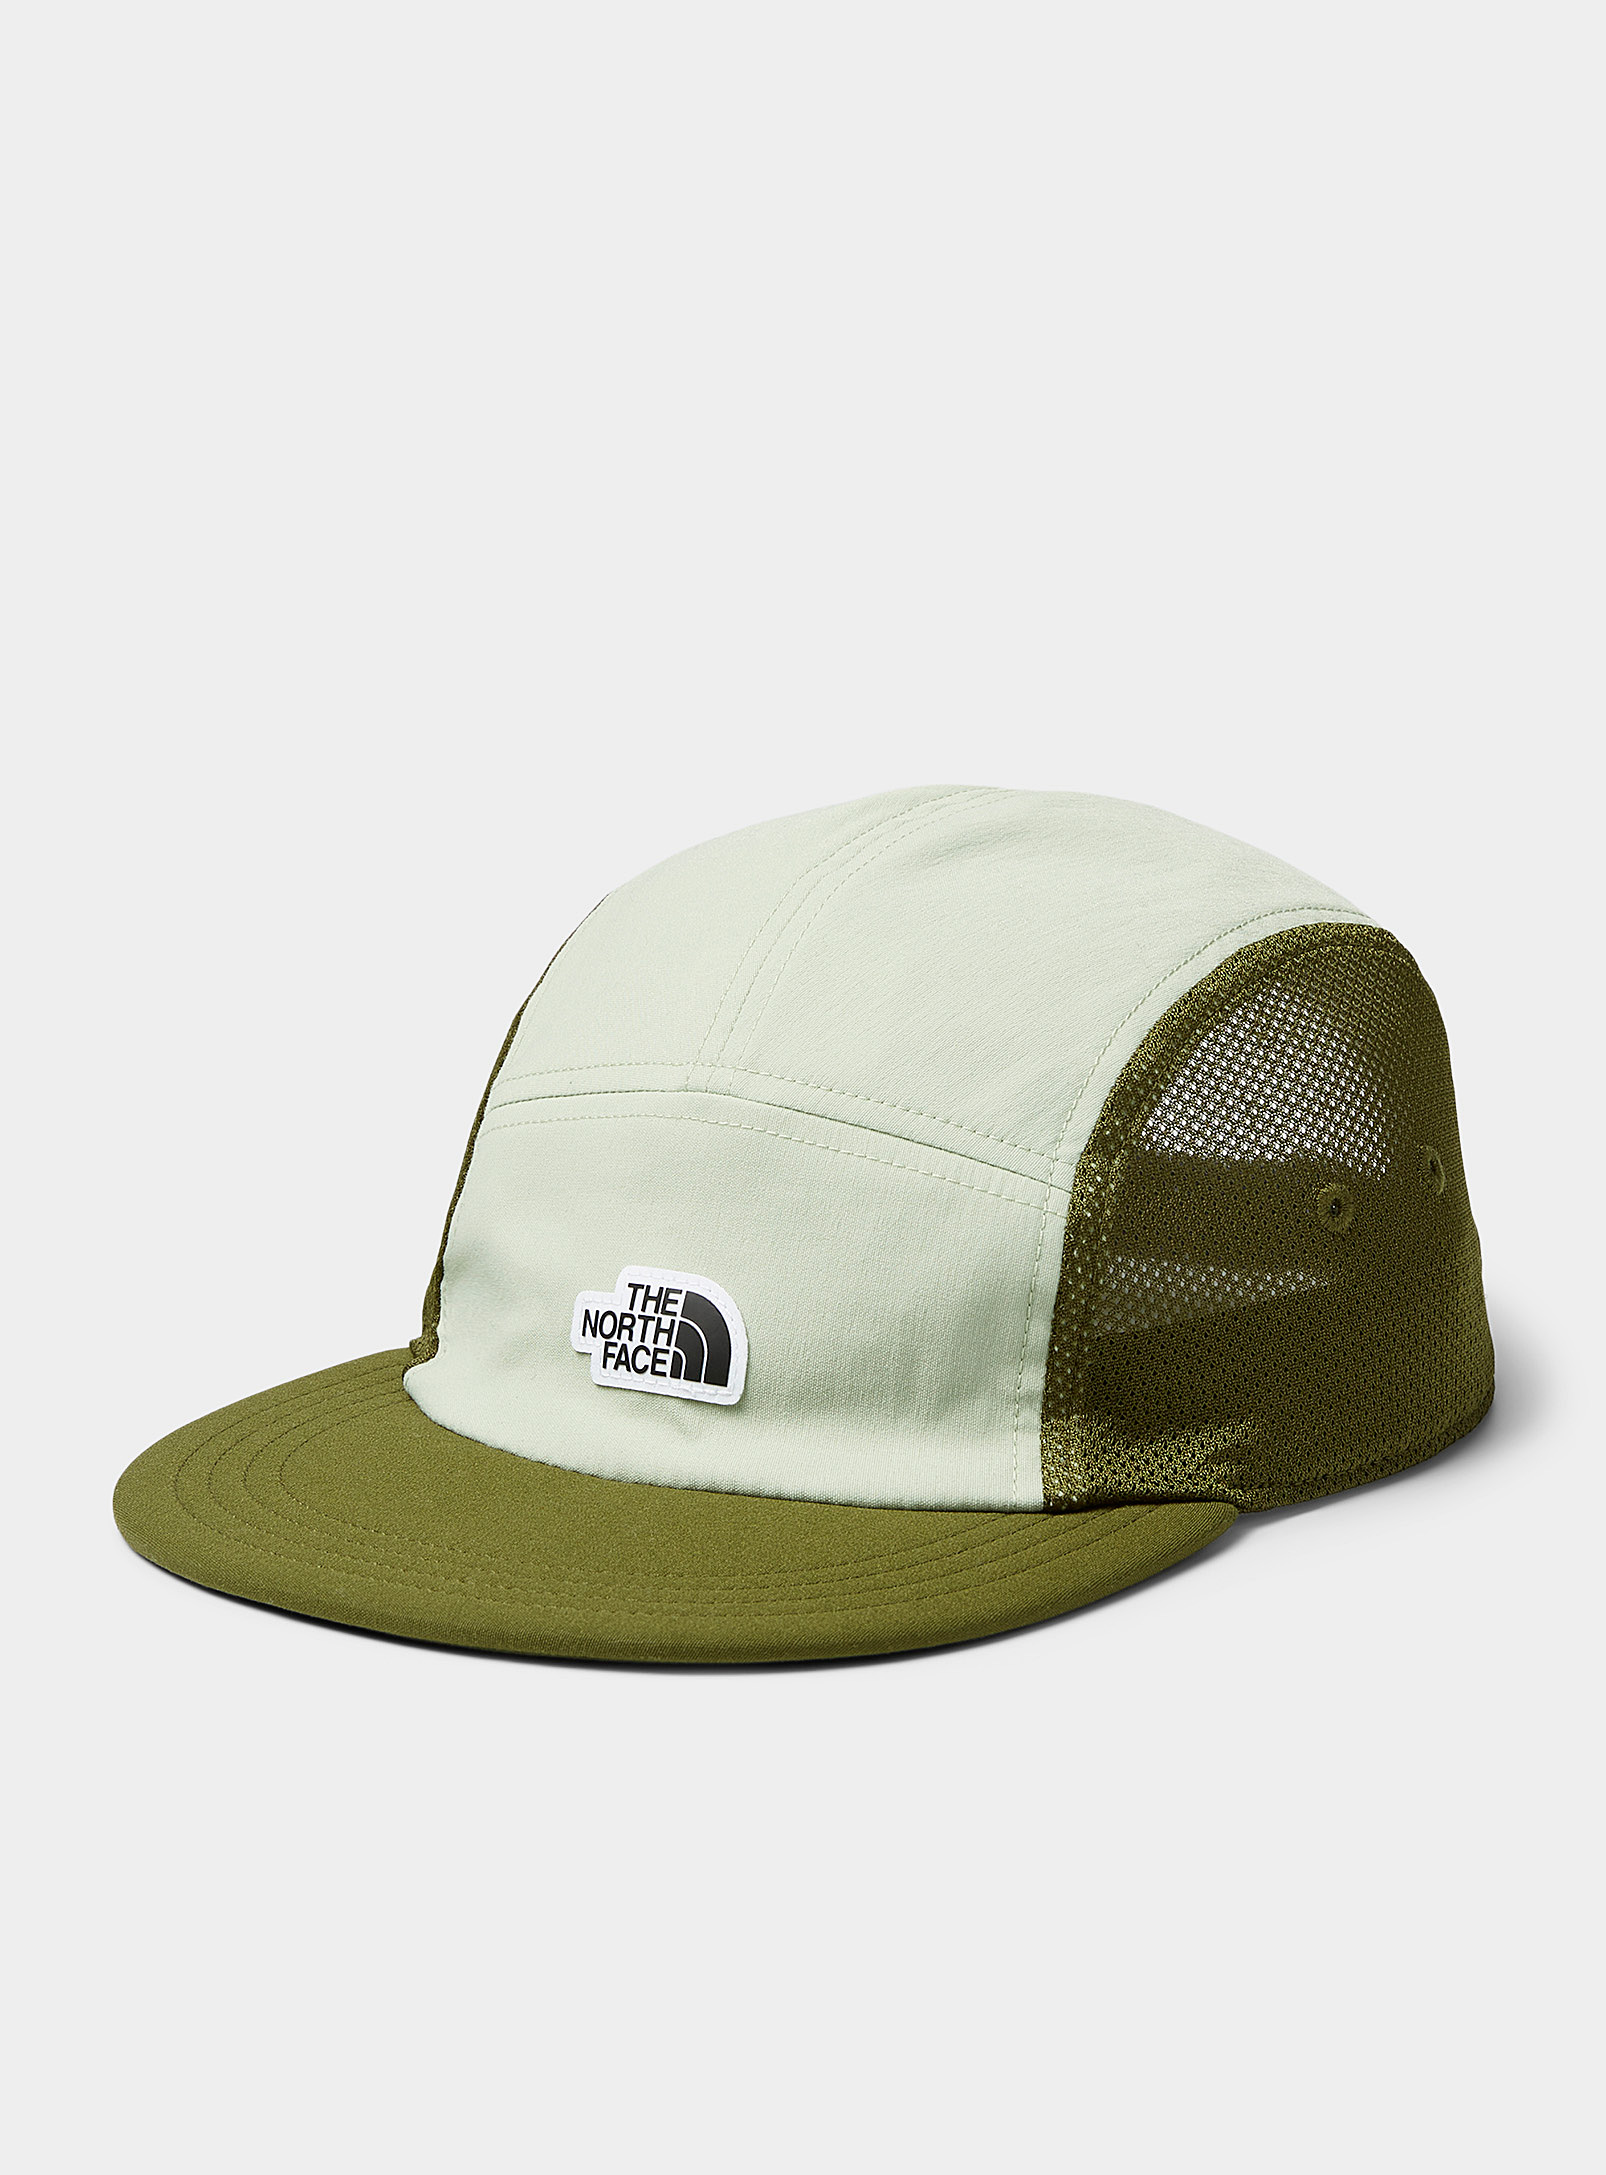 The North Face Class V 5-panel Mesh Cap In Green